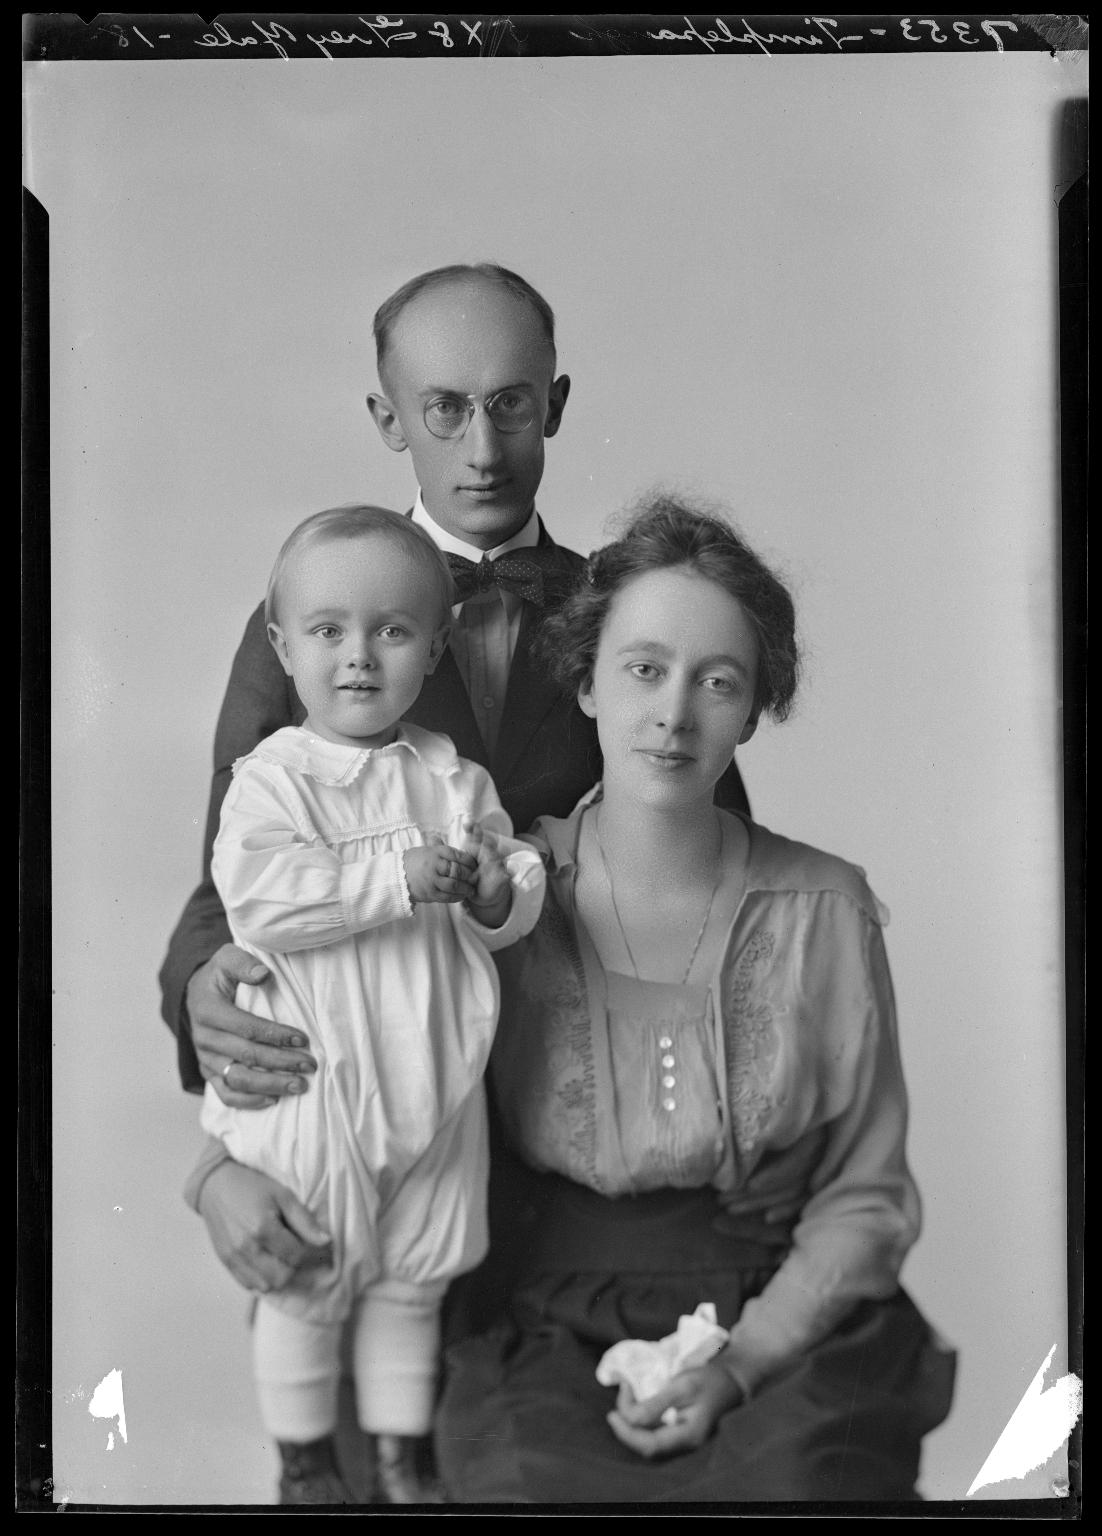 Portrait of B. W. Timplepaugh and family